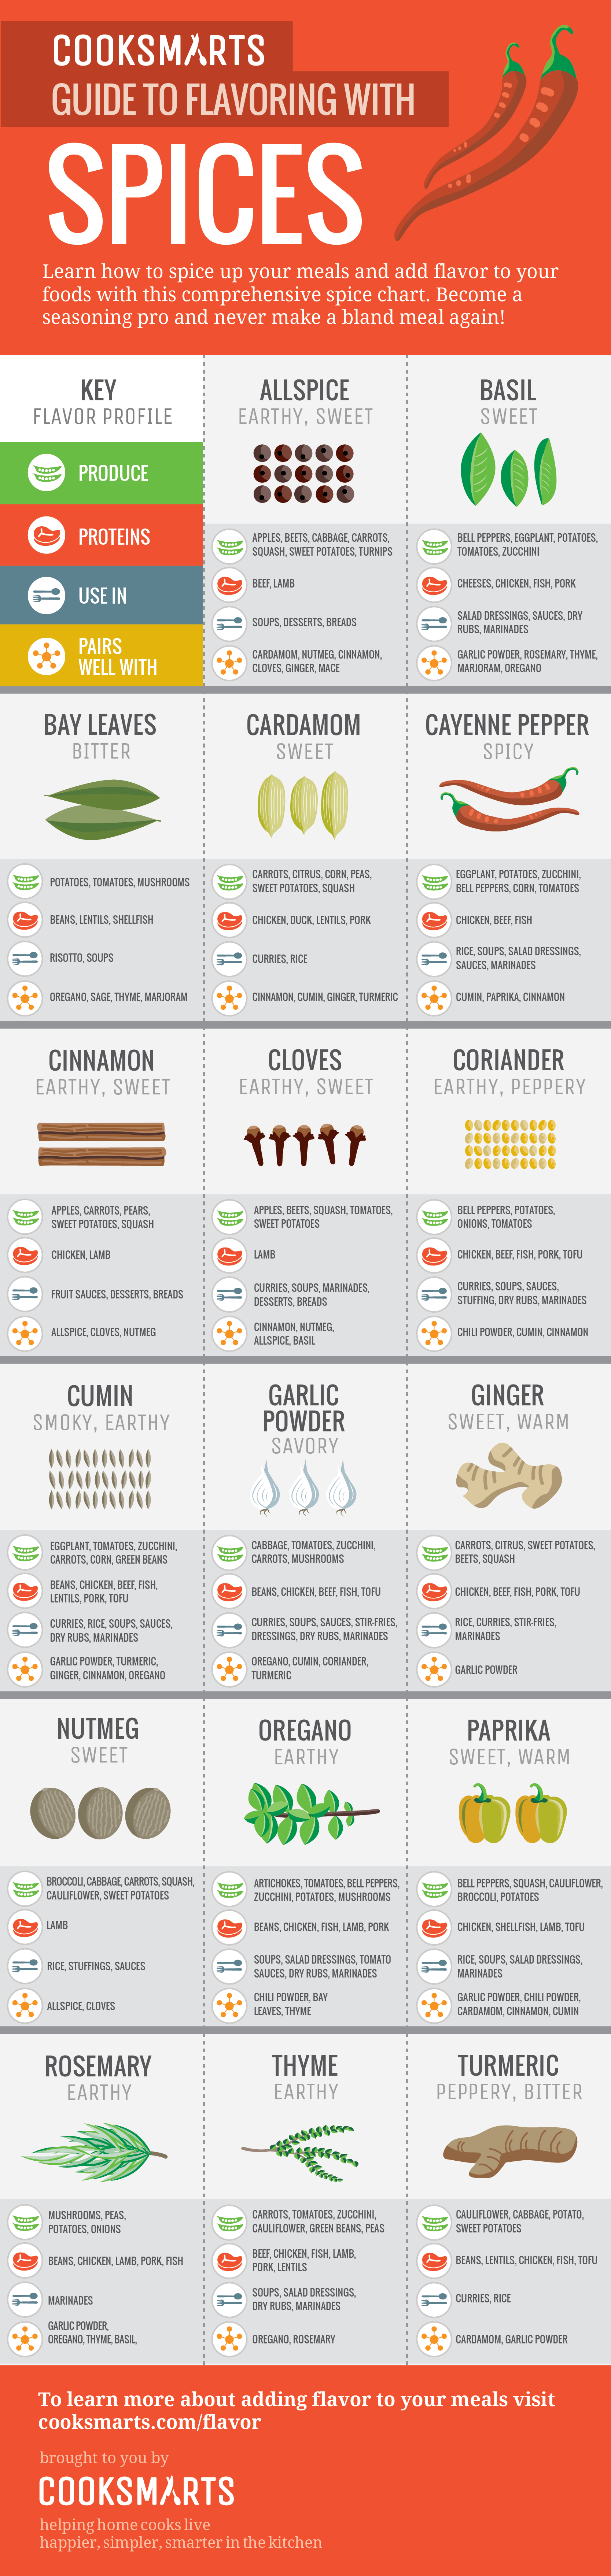 Guide to Flavoring with Spices via @Cook Smarts #infographic #spices #flavor